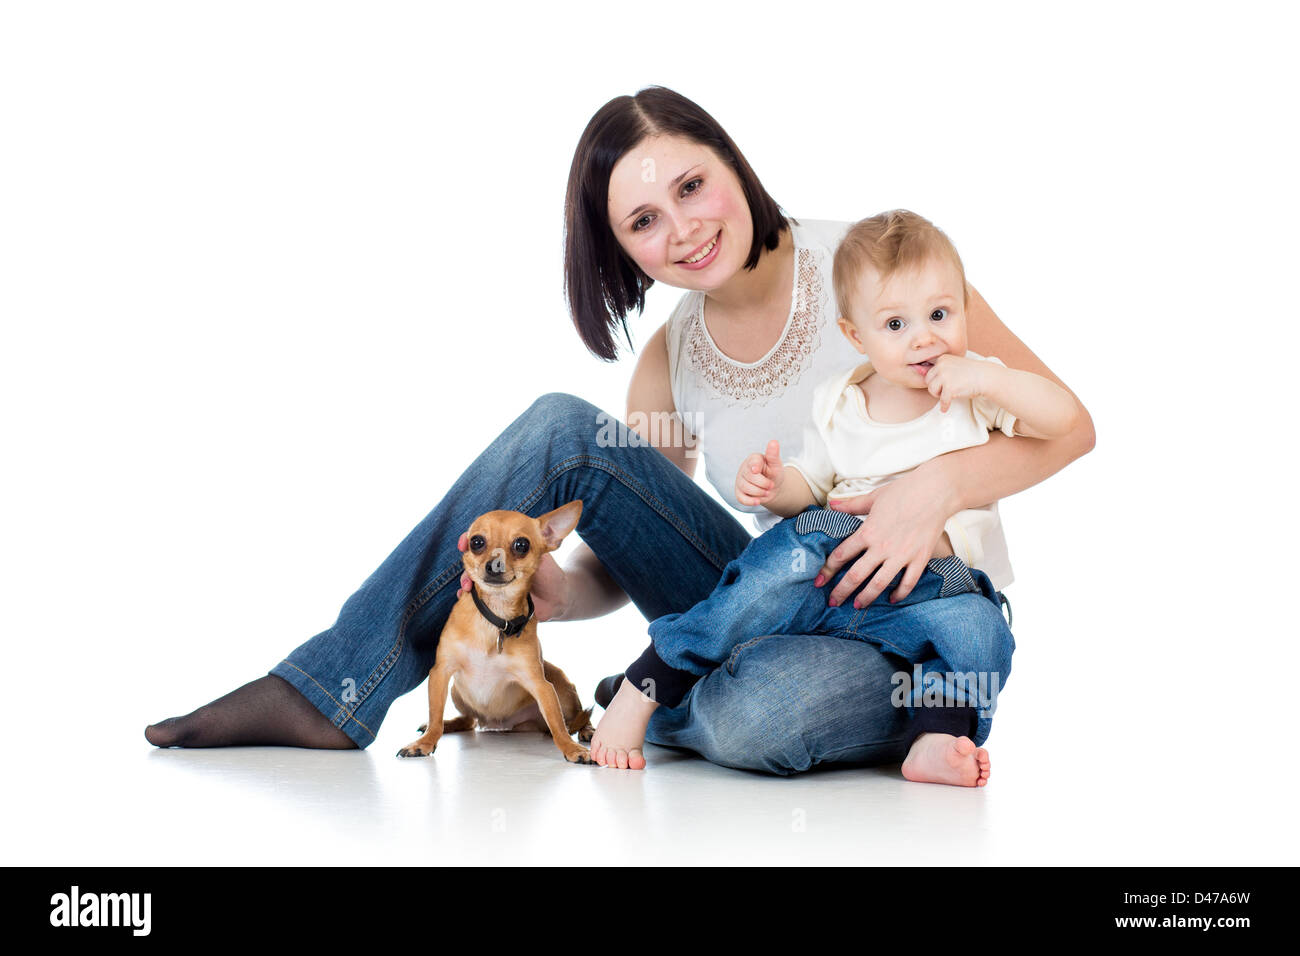 mother, baby boy and dog isolated on white background Stock Photo